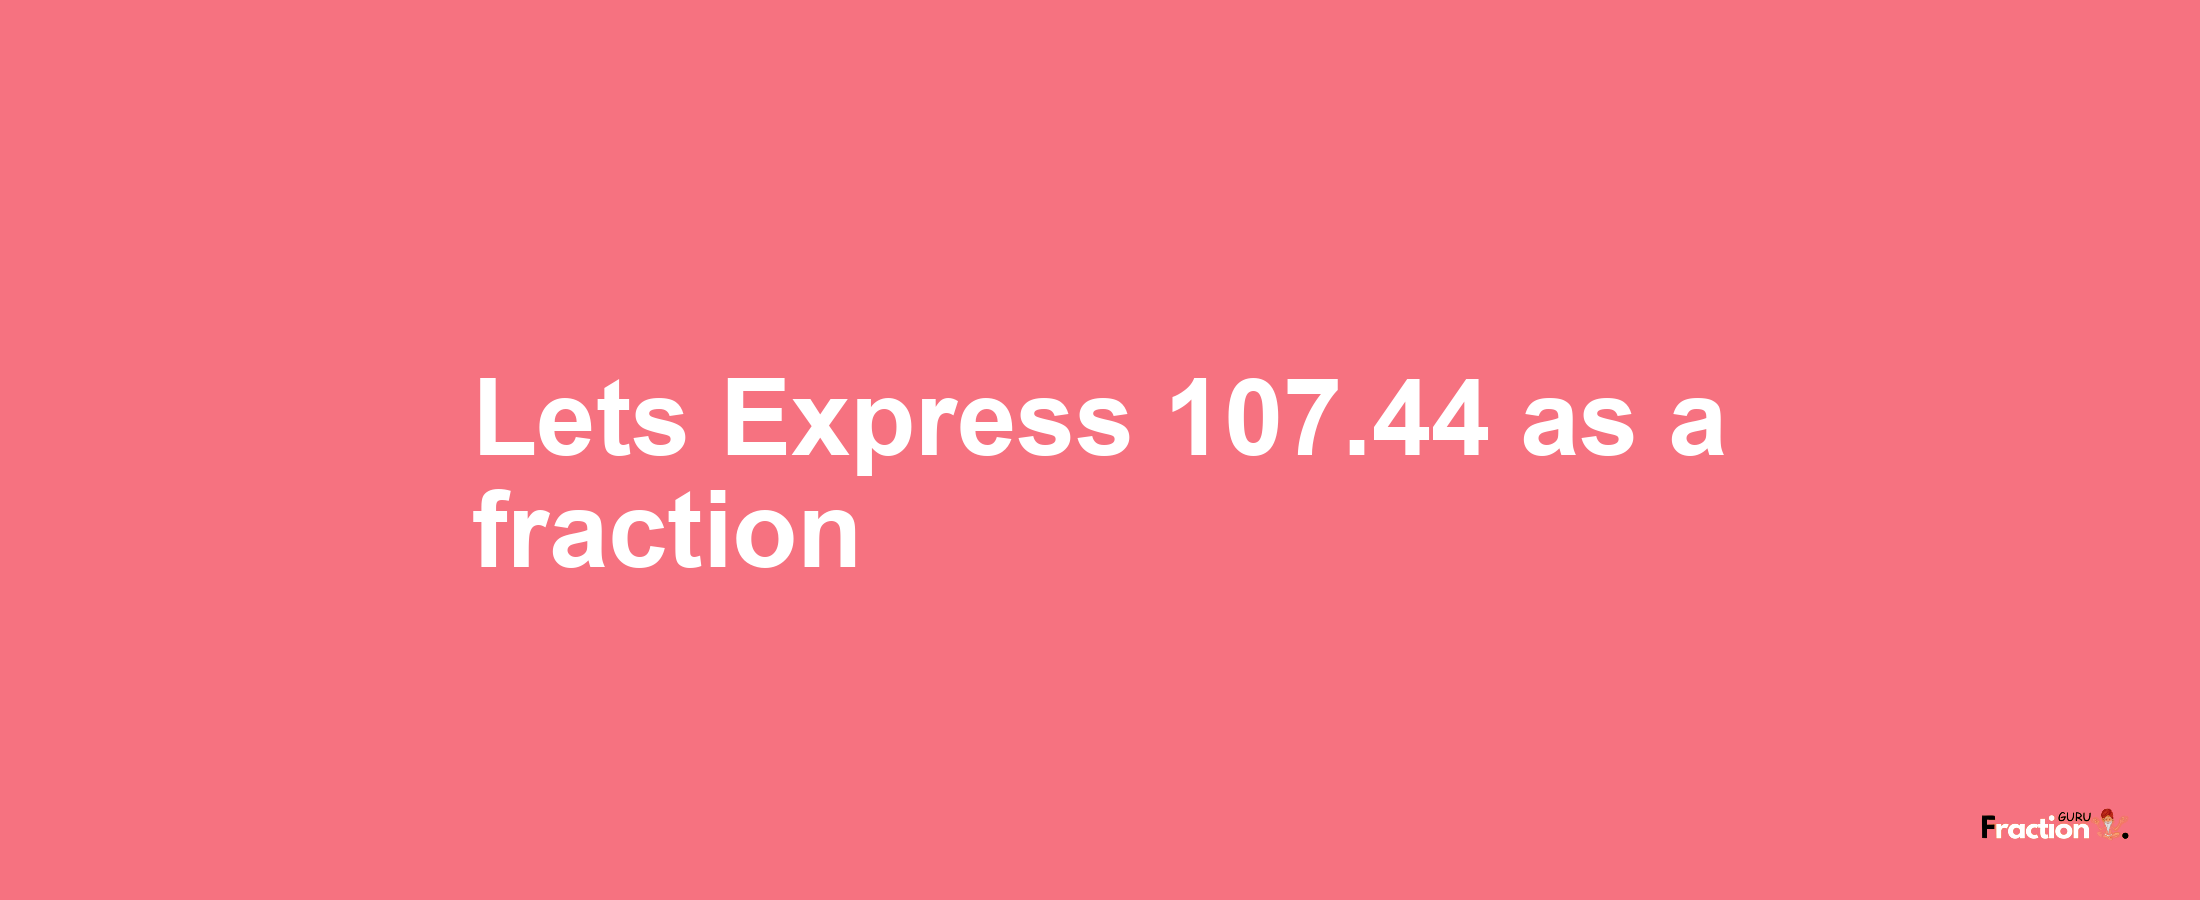 Lets Express 107.44 as afraction